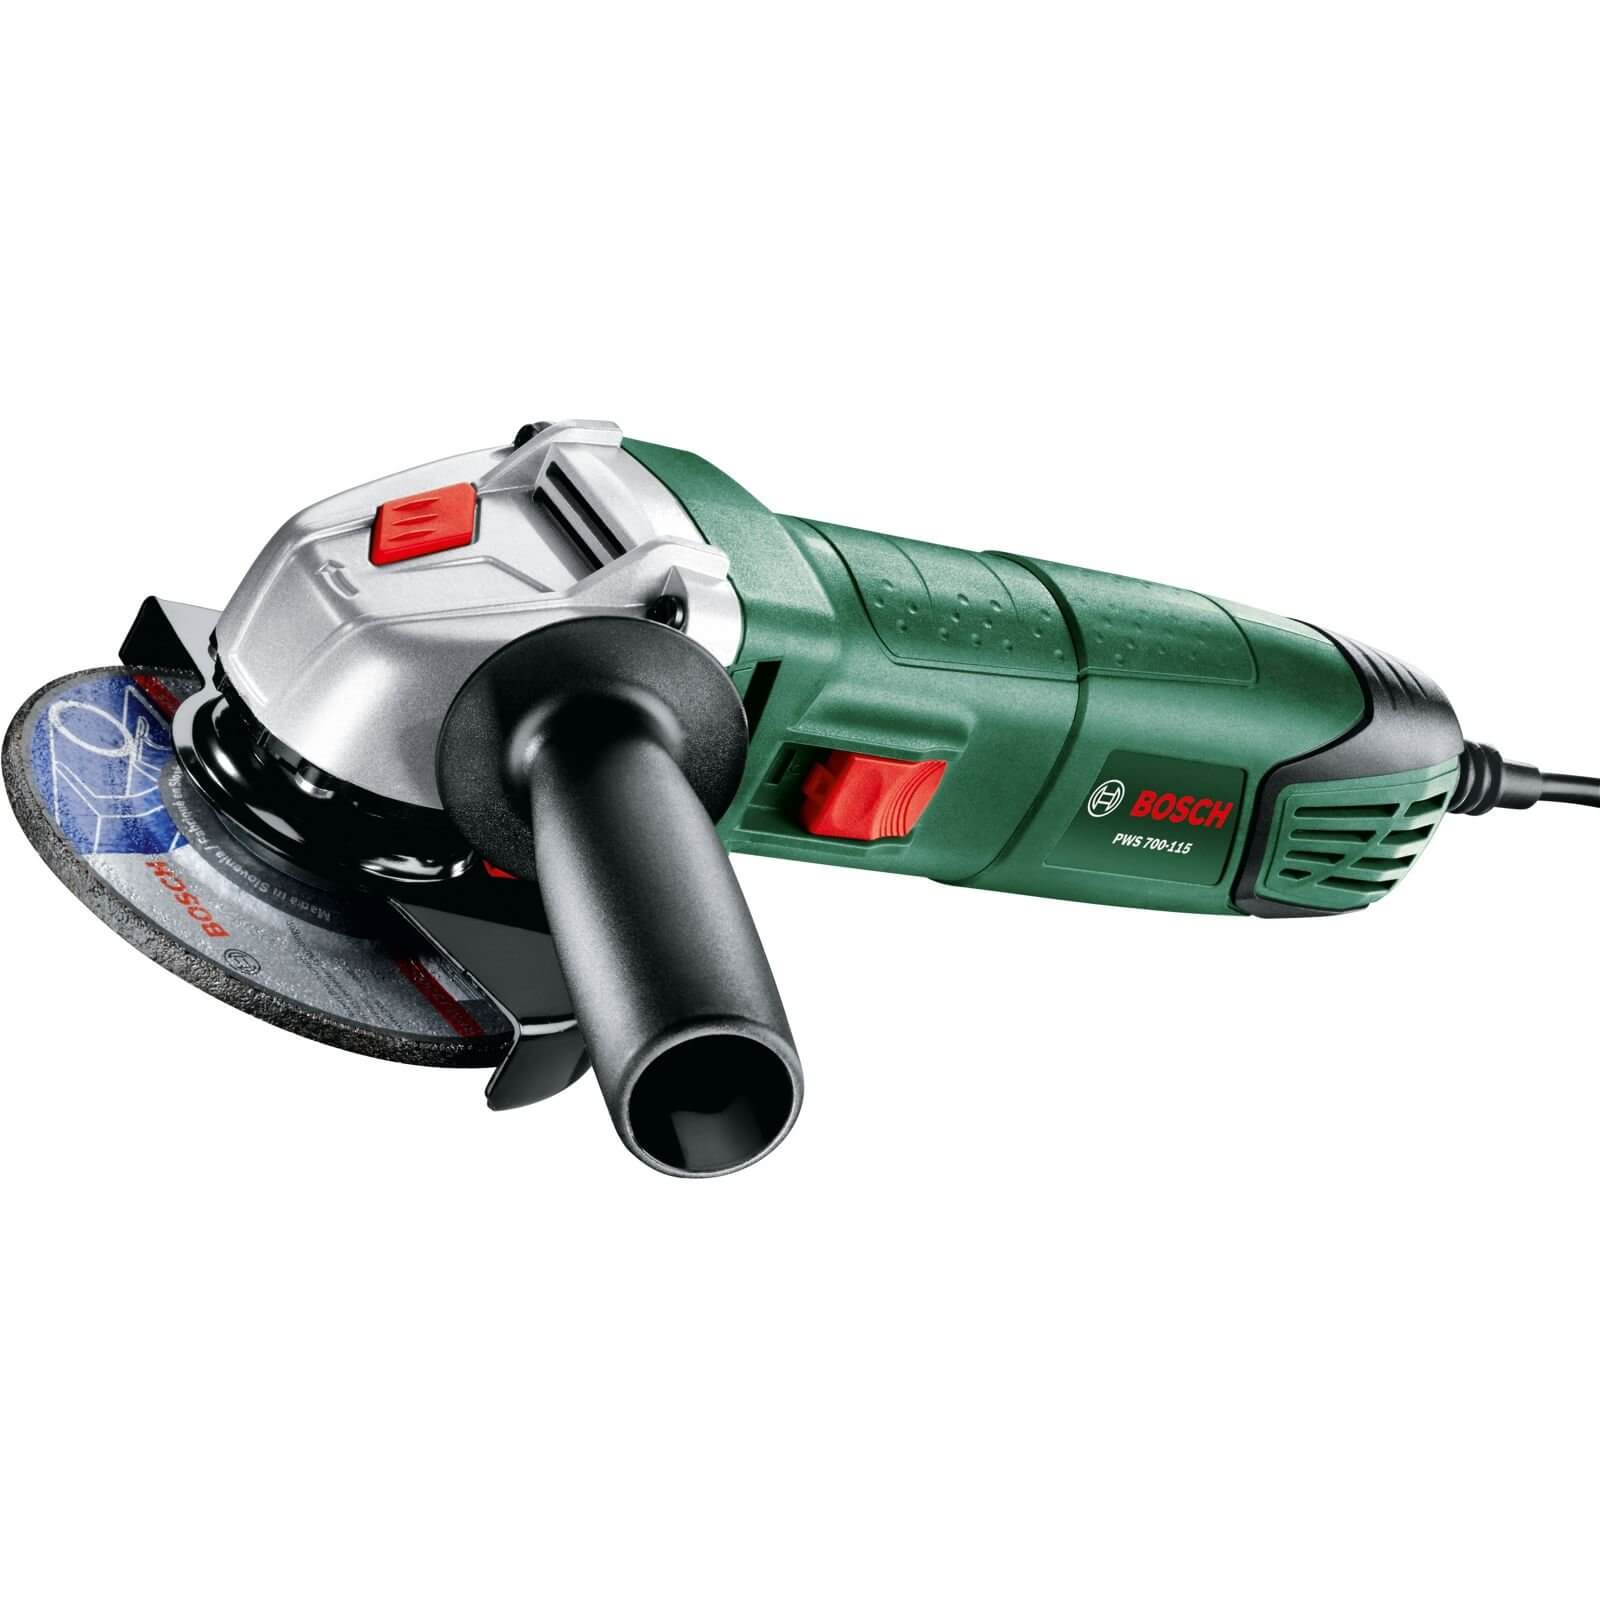 Bosch PWS 700-115 Electric 700W Angle Grinder